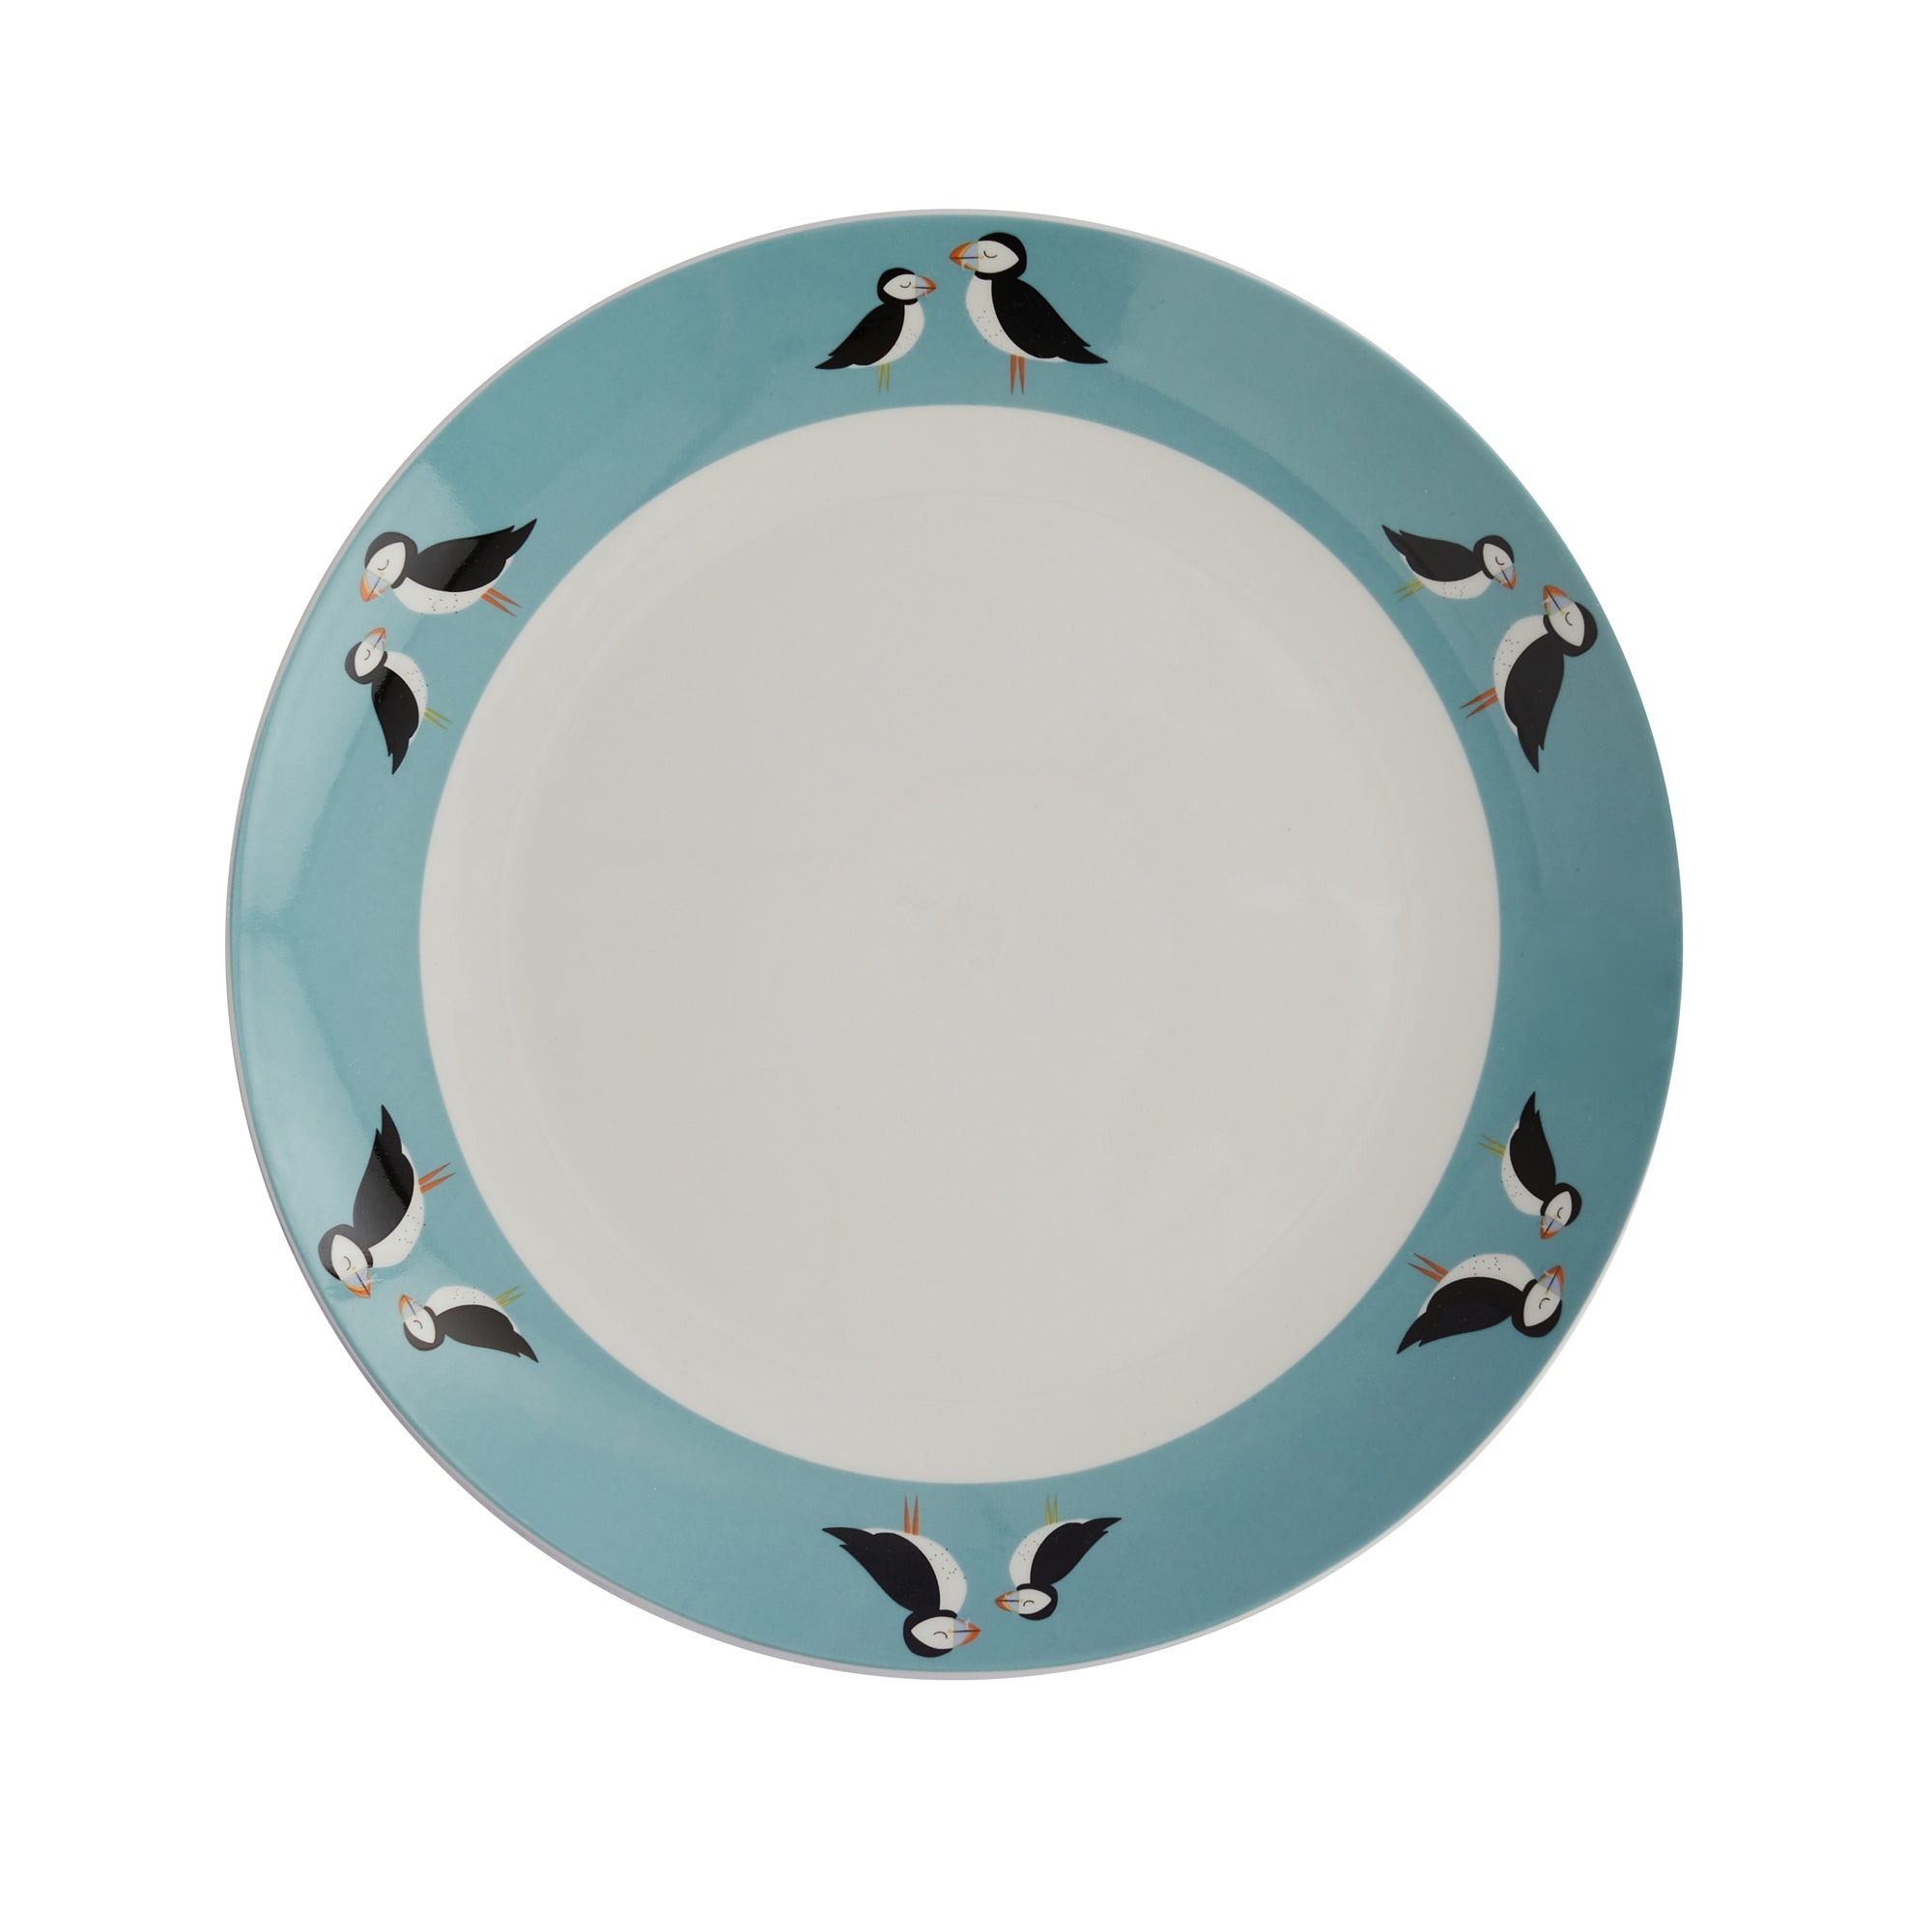 Puffin Porcelain Dinner Plate